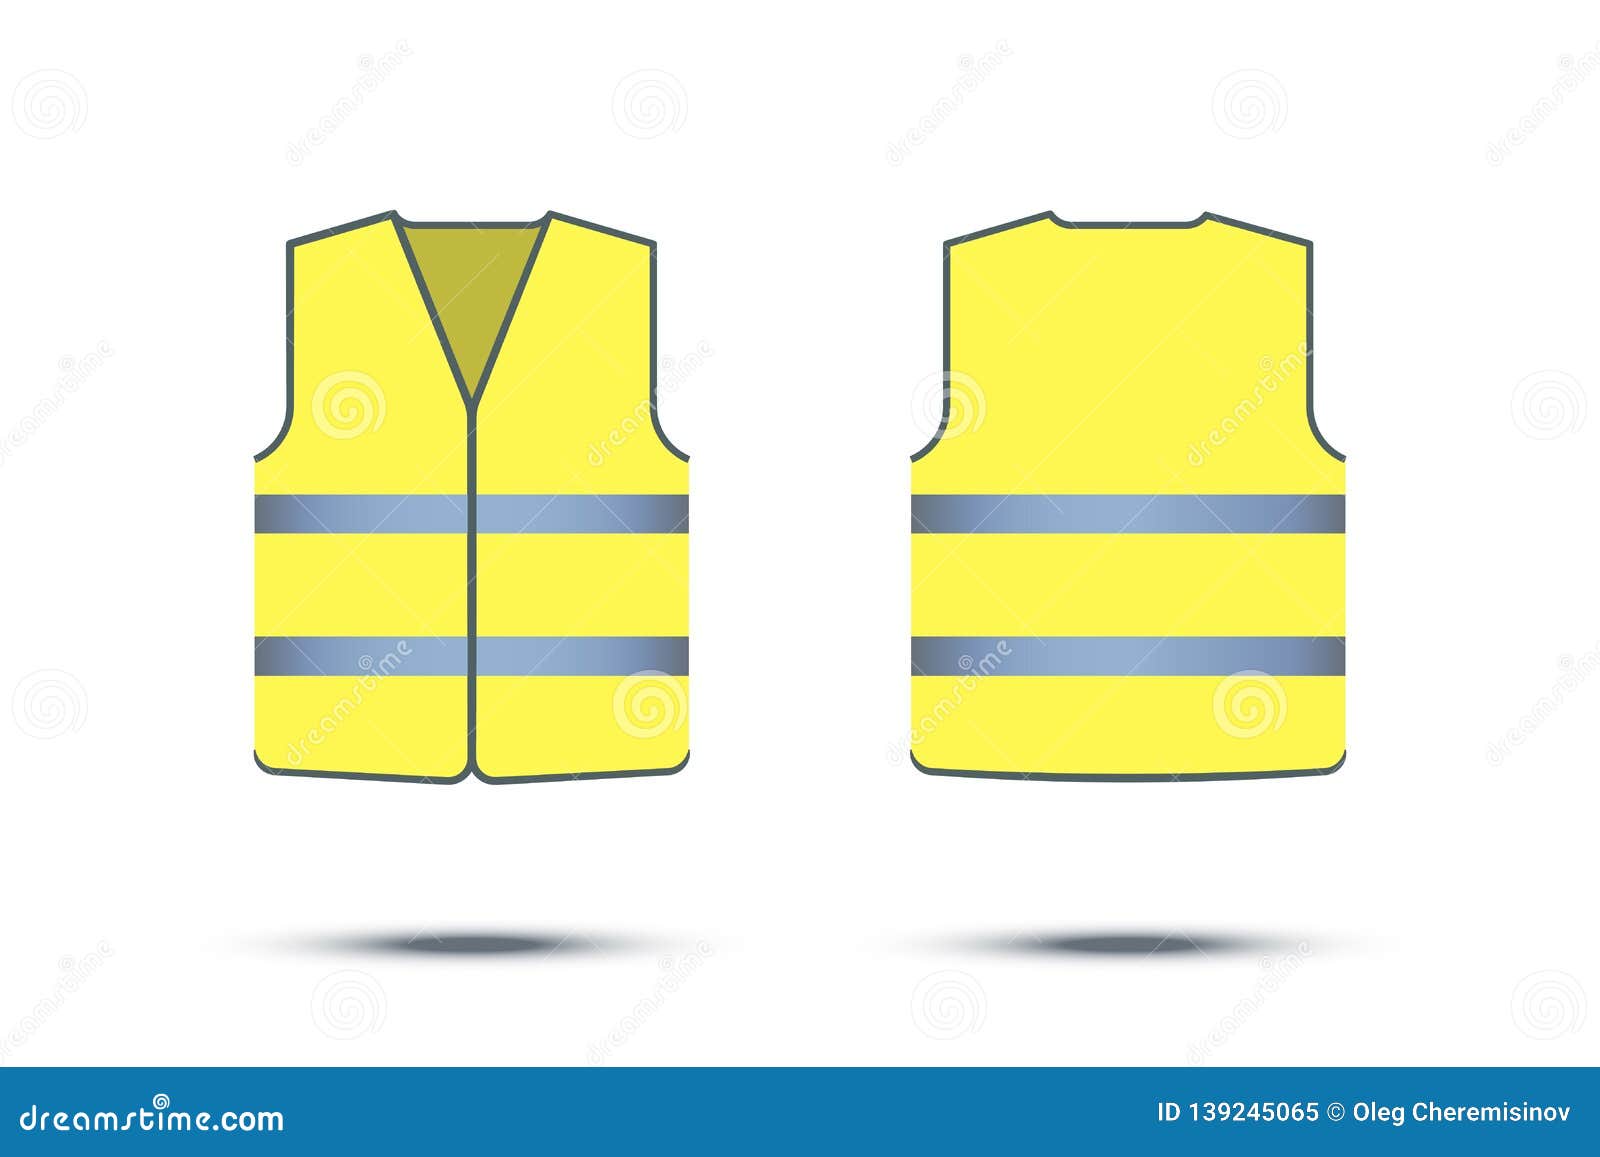 Yellow Reflective Safety Vest For People,front And Back View Uniform ...